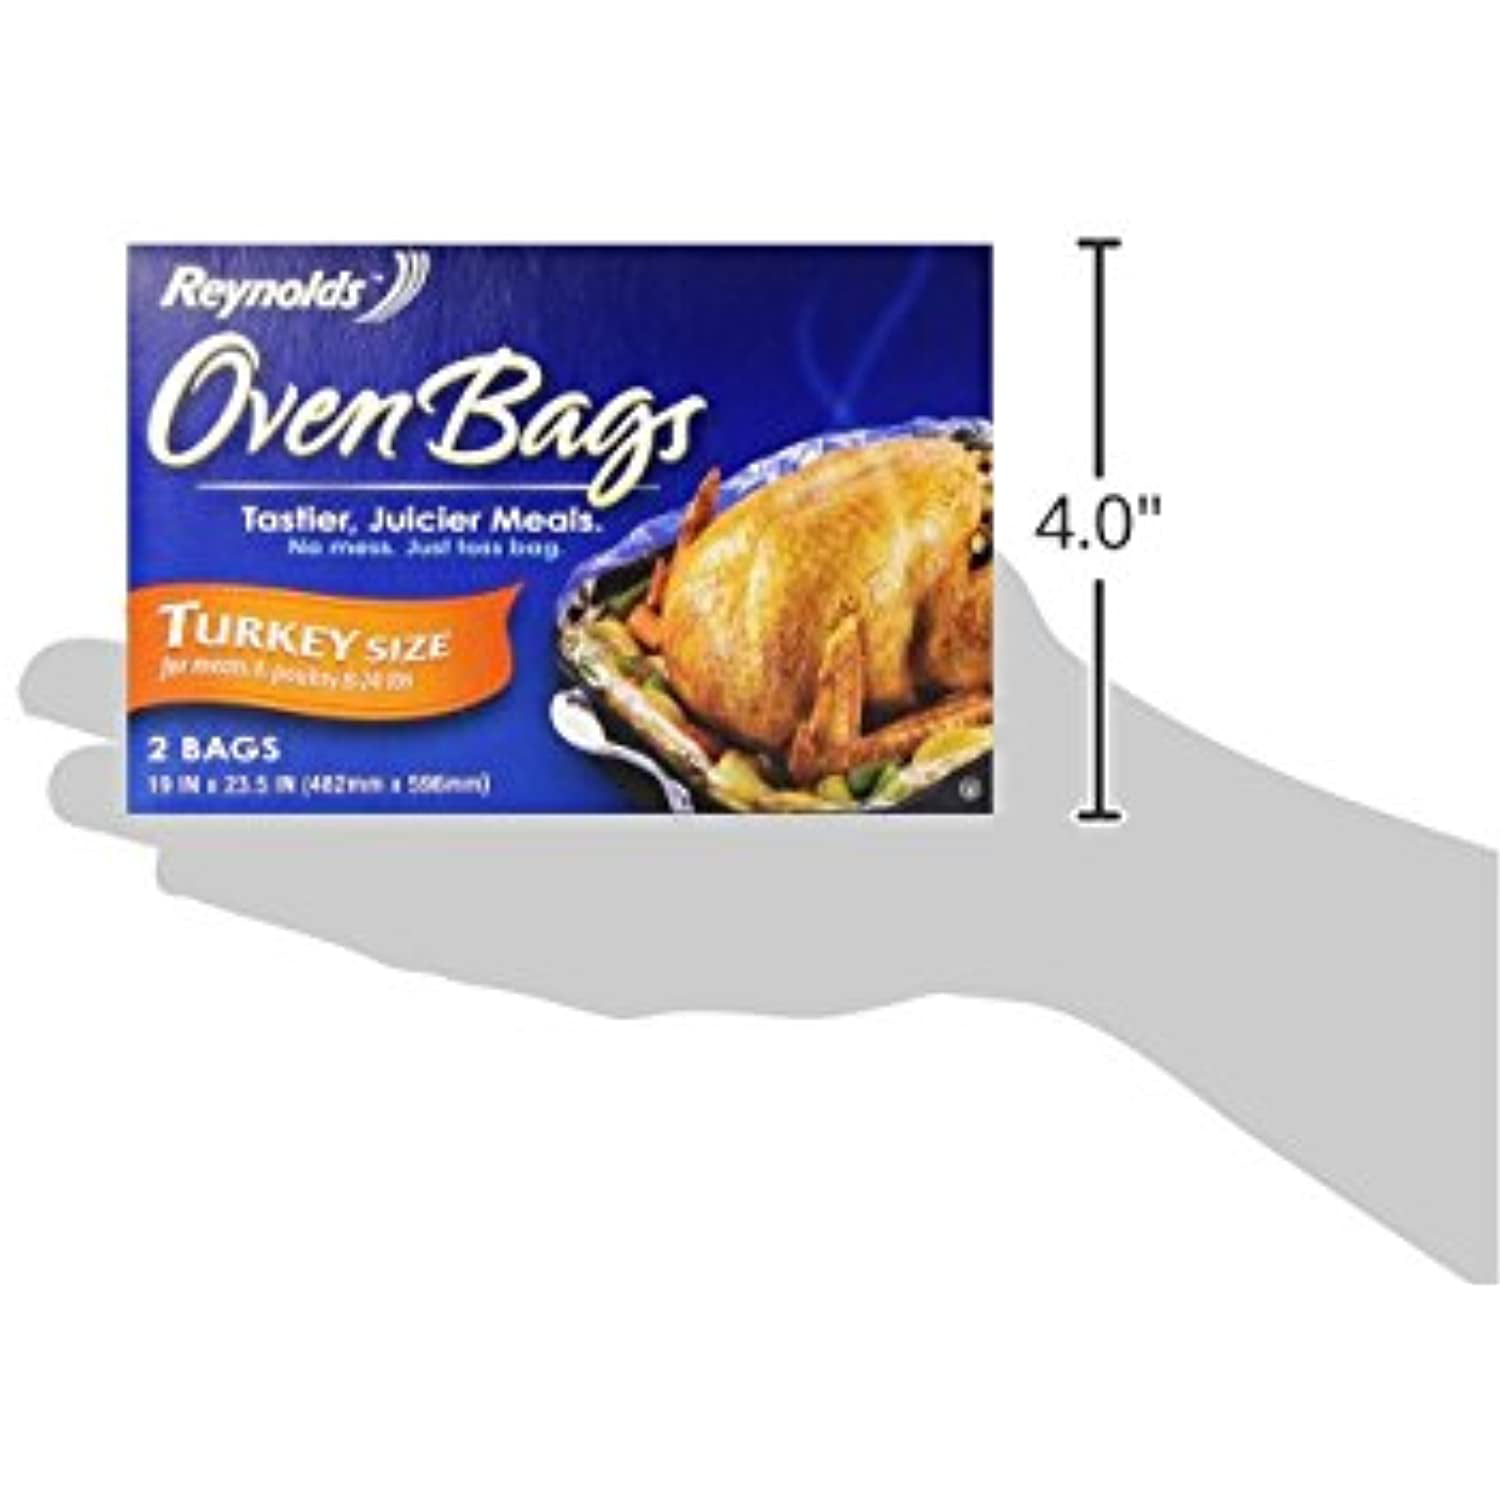 Reynolds Kitchens Oven Bags Turkey Poultry Size 8-24lbs 19x23.5 4 Total  Bags